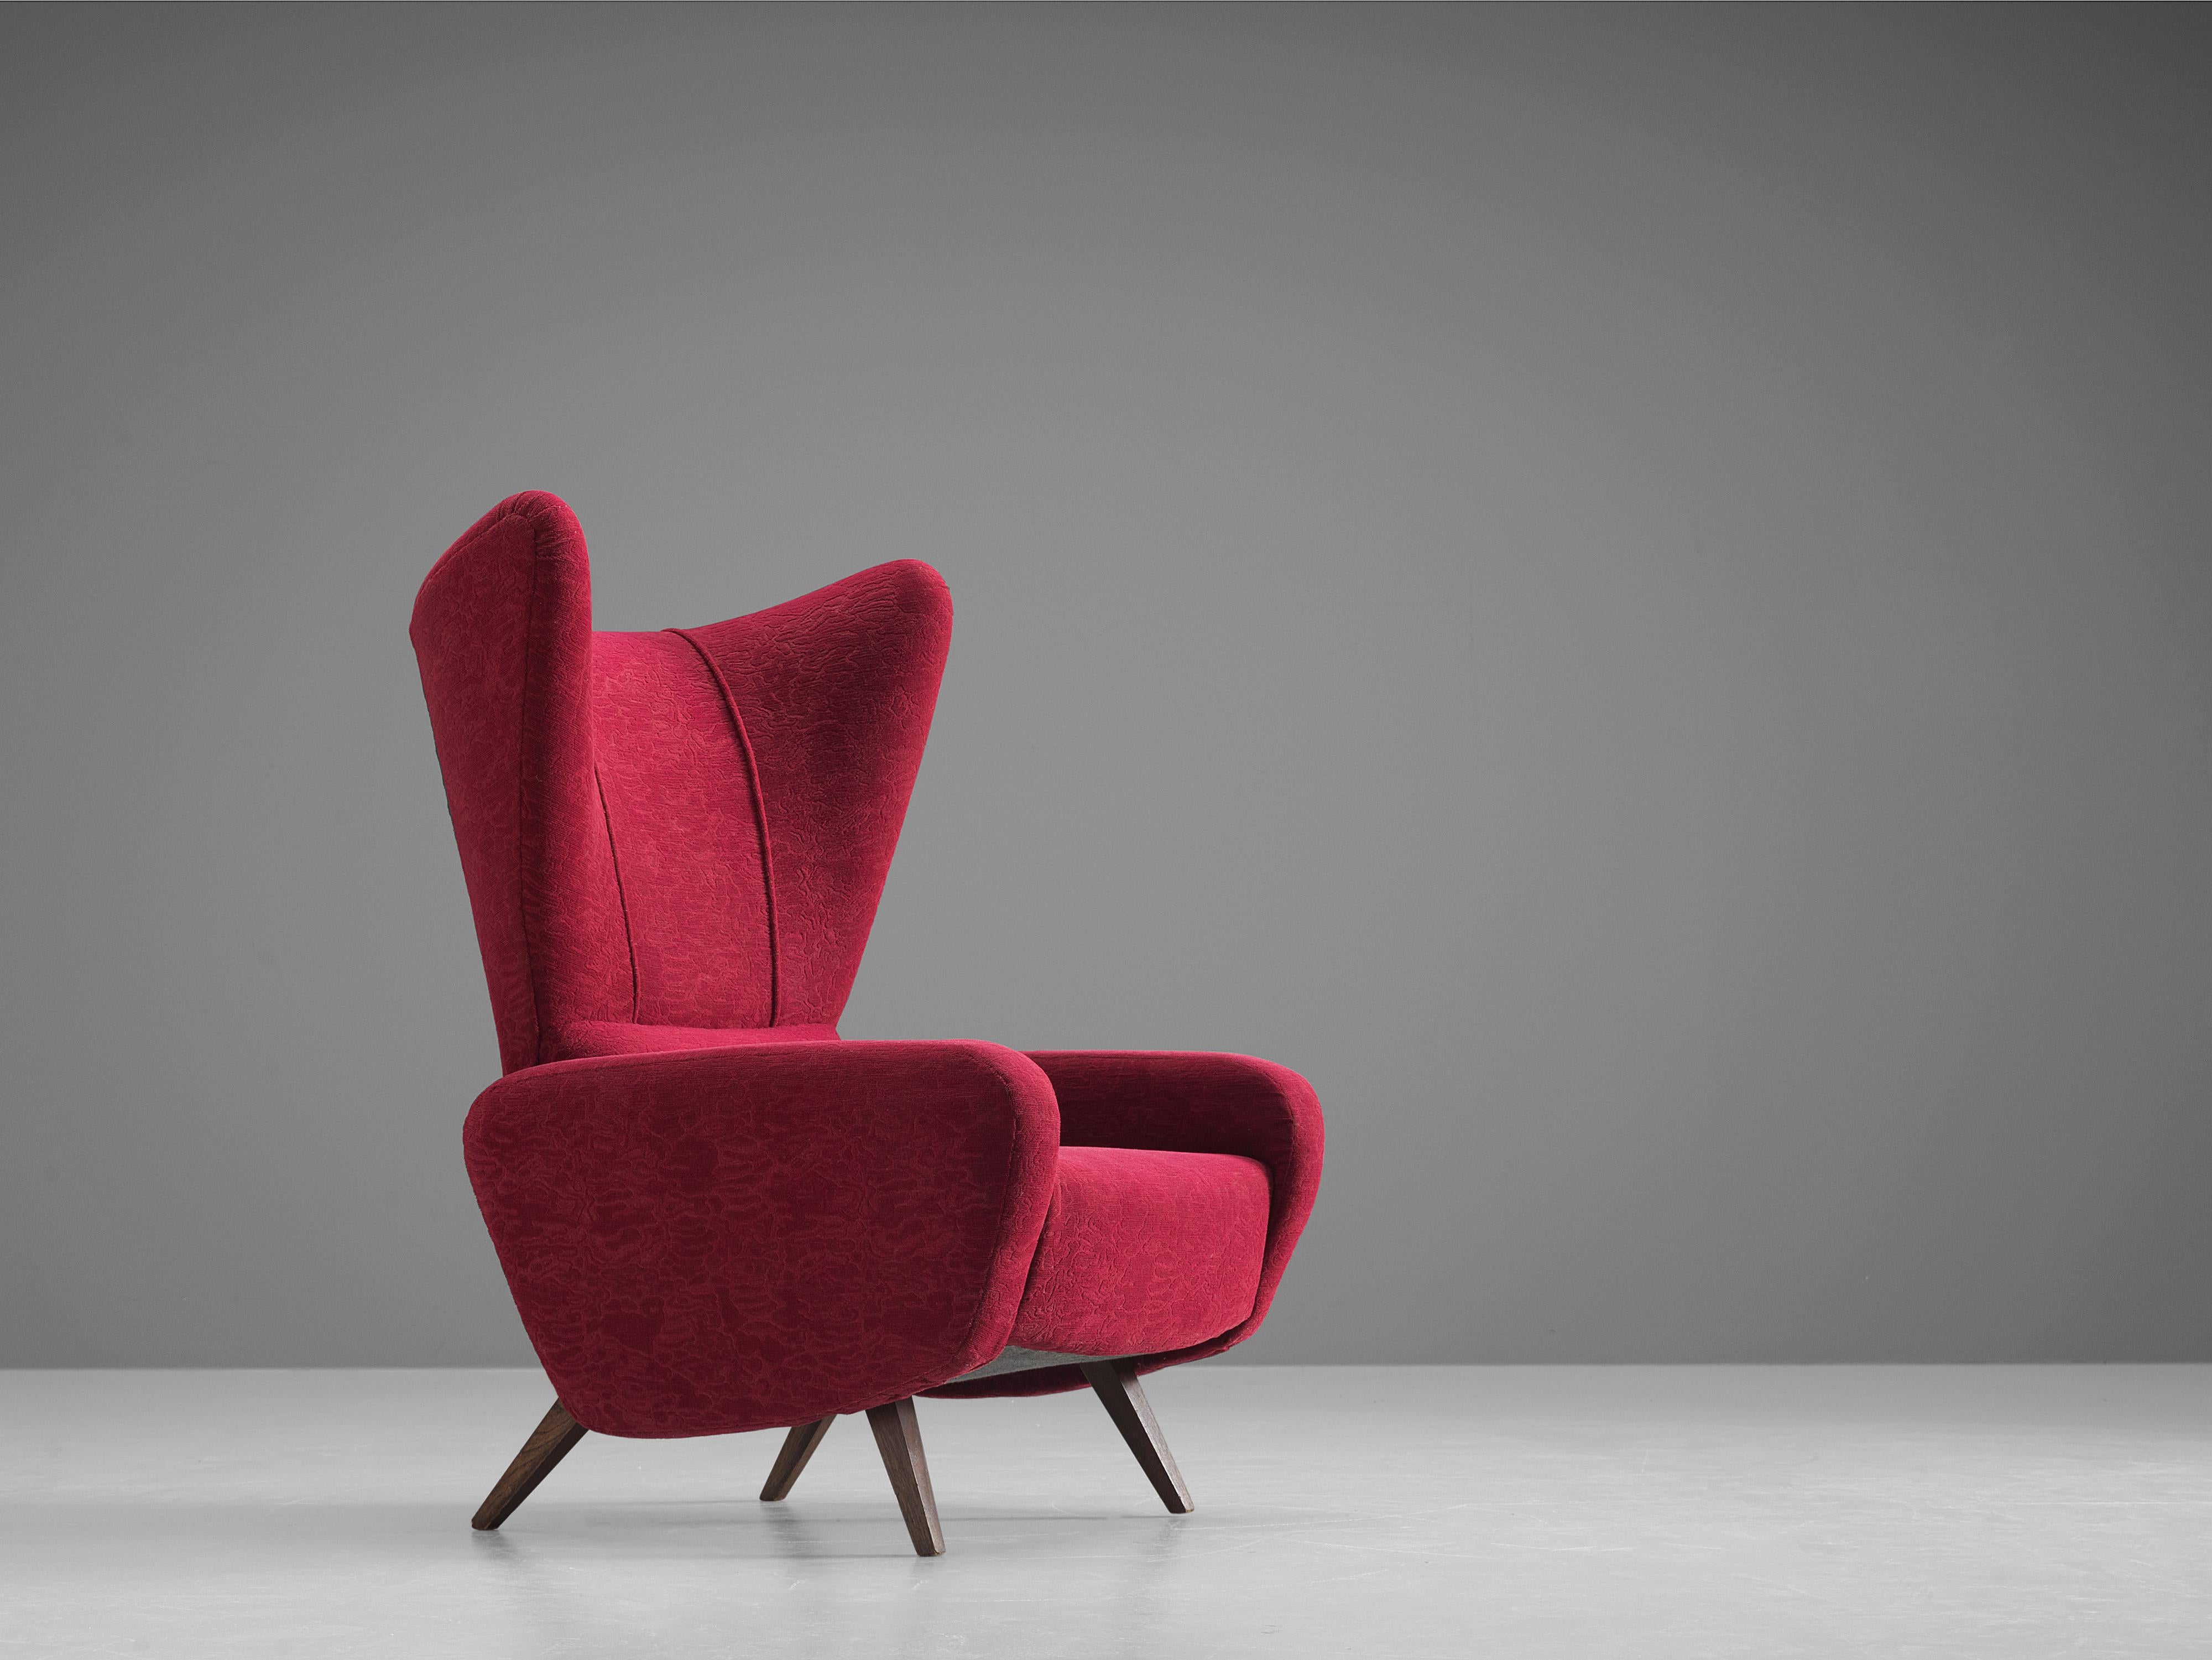 Wingback armchair, fabric, wood, Italy, 1950s.

This Classic Italian wingback chair has all the traits of midcentury Italian design. The unusually high back, the gracious wings, the grand armrests and delicate tapered wooden legs form the main